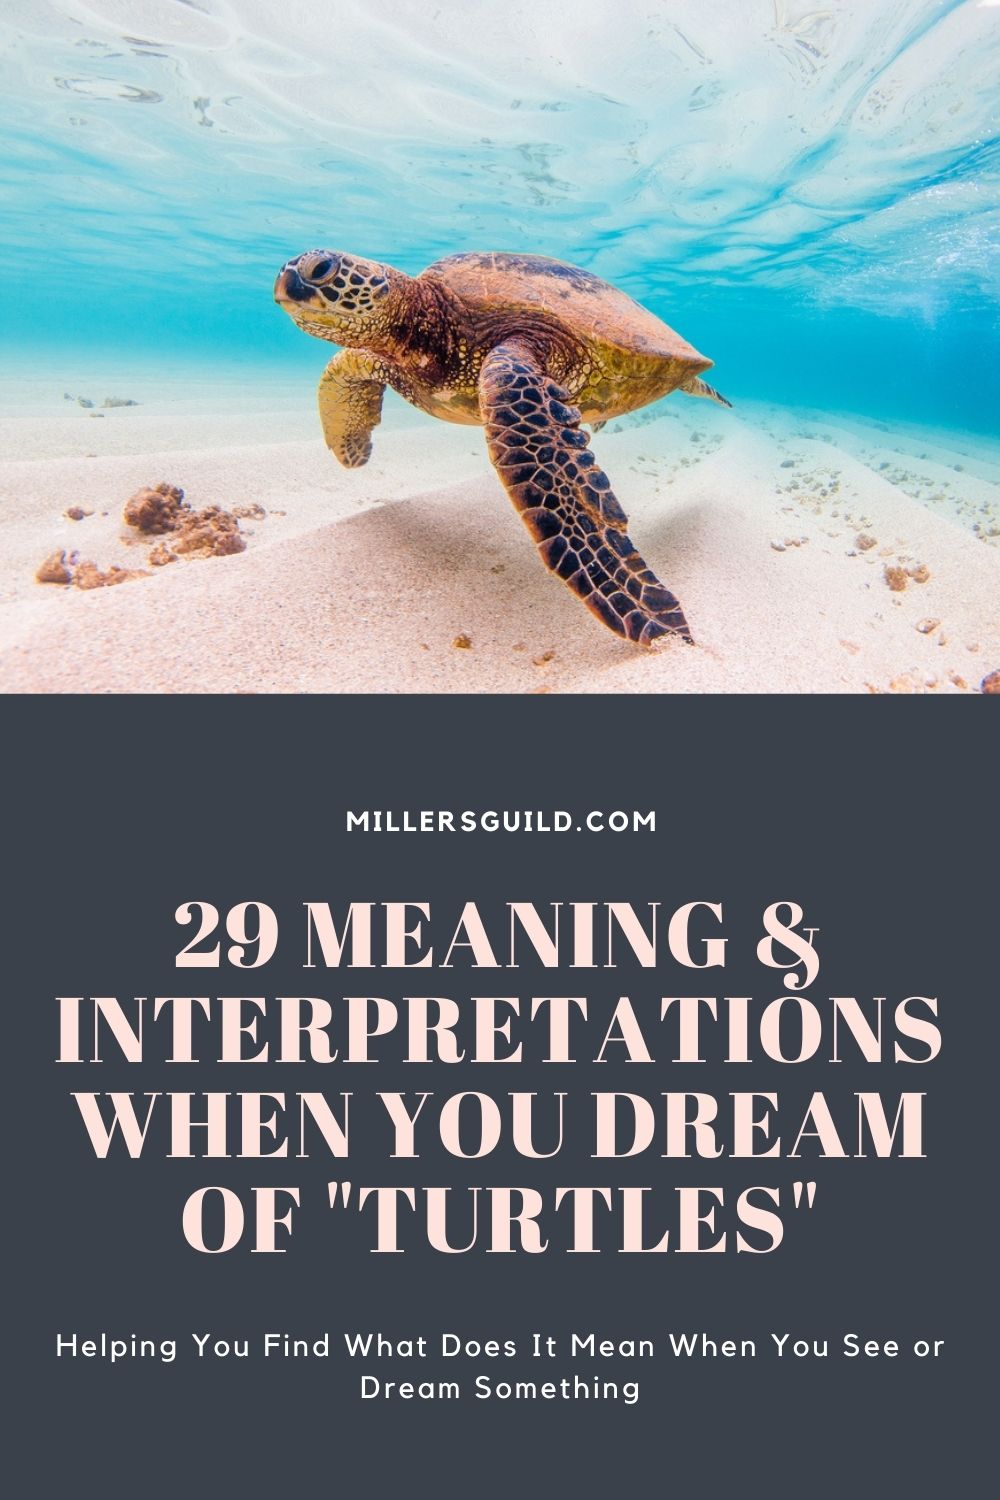 29 Meaning & Interpretations When You Dream of Turtles 4